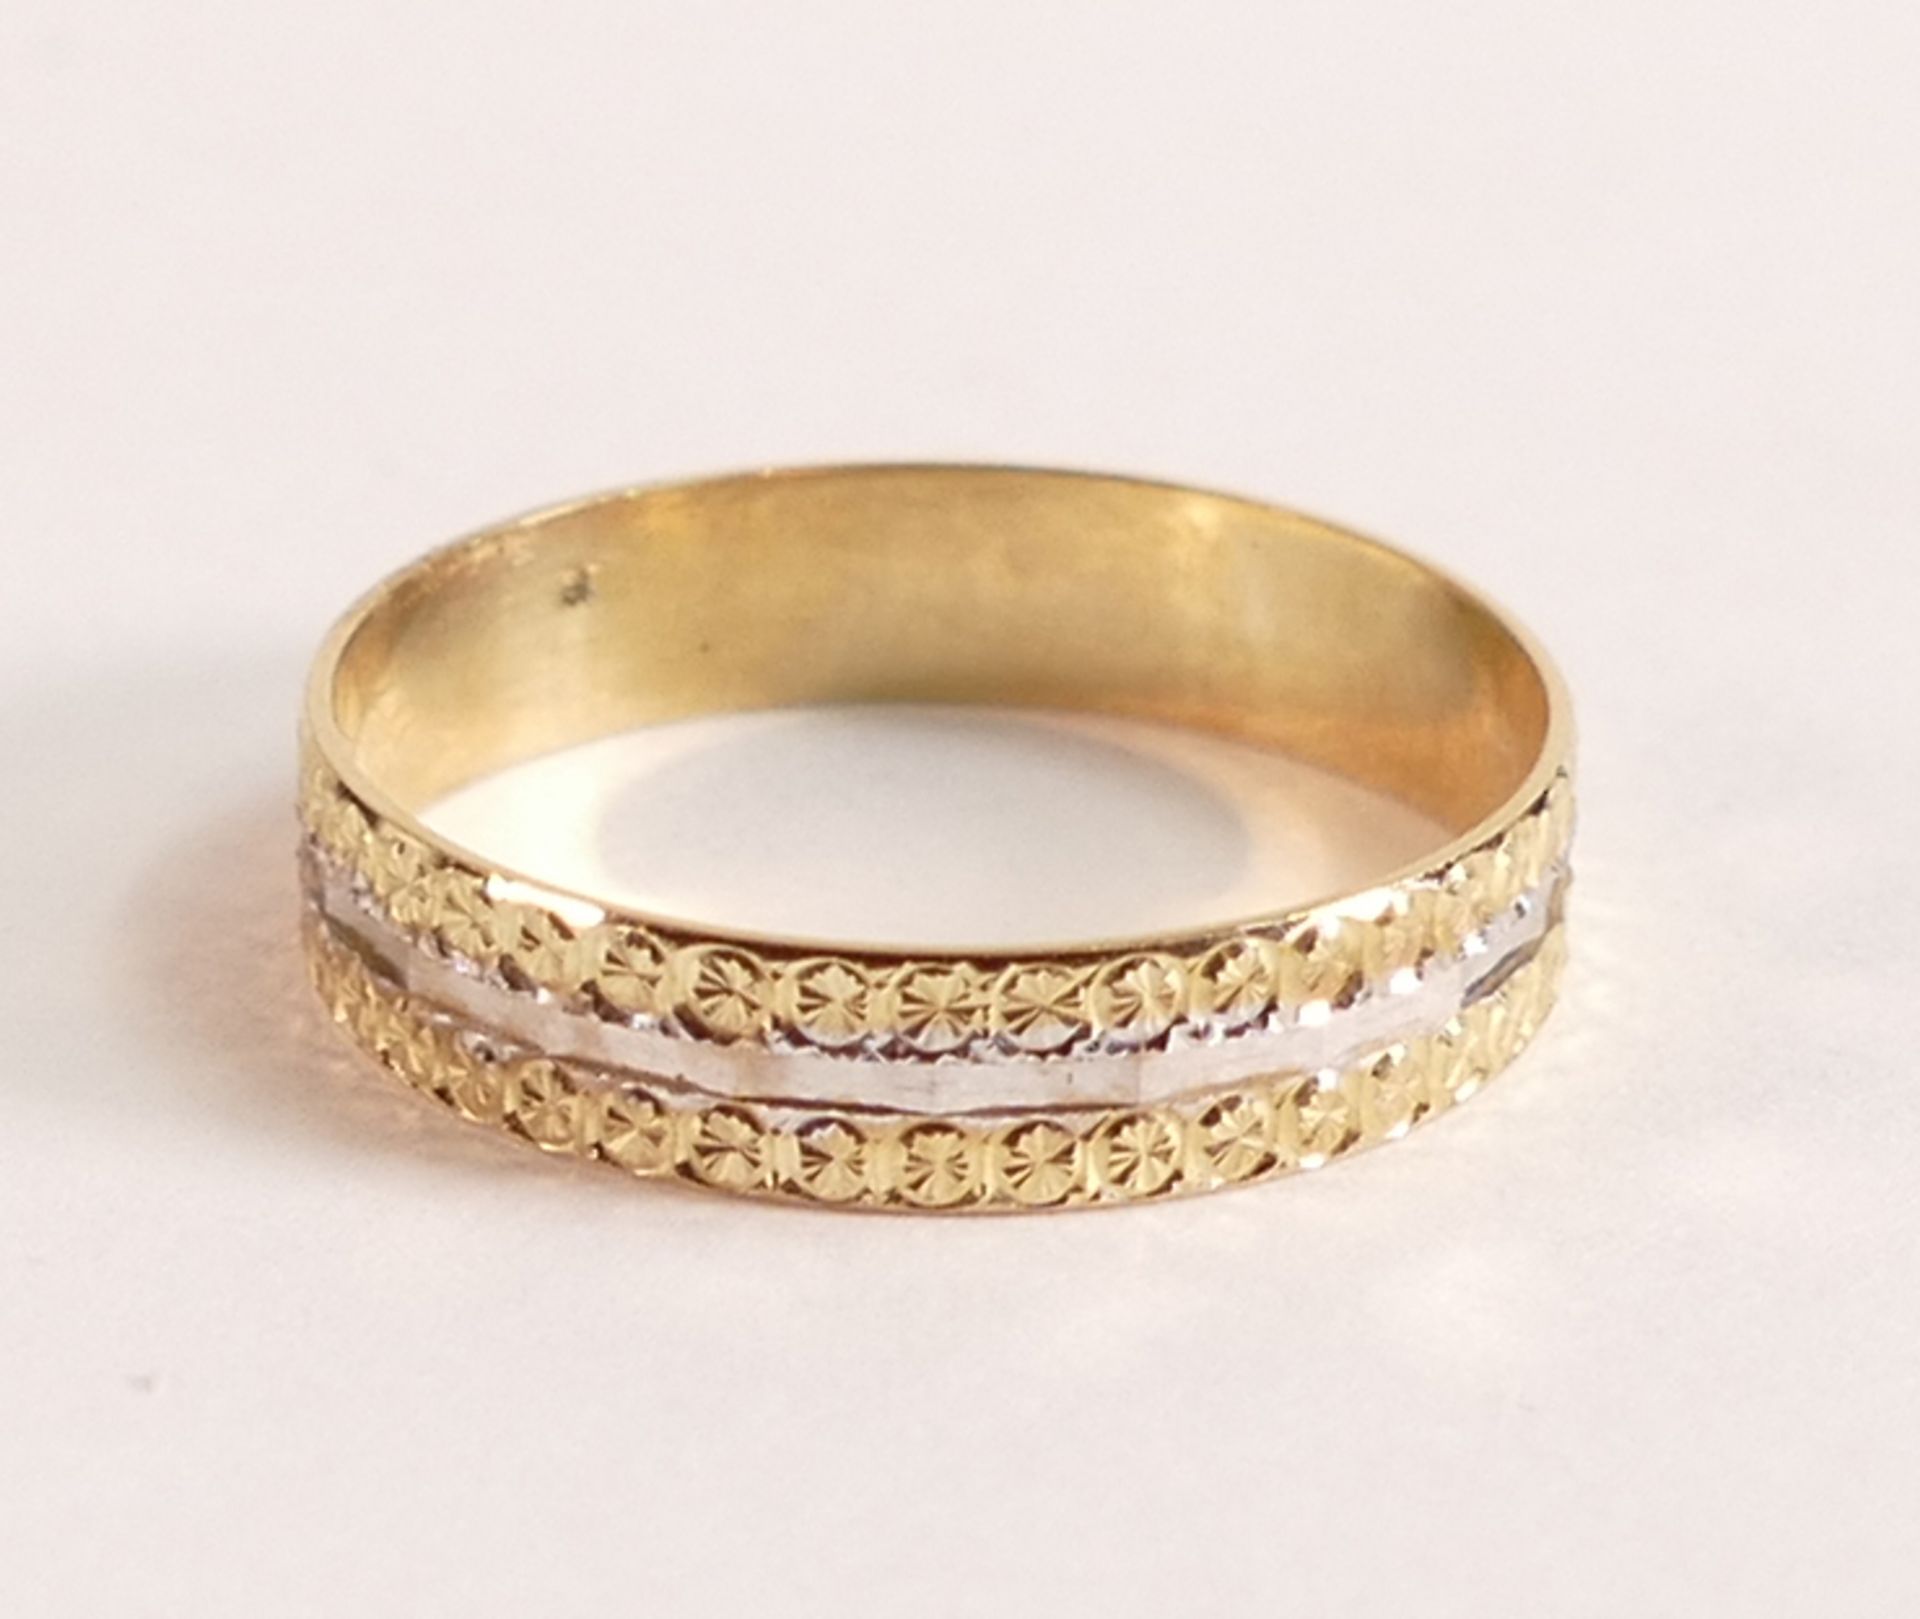 9ct Gold Wedding Band - Sparkle design, 9ct Yellow Gold band. Diamond Cut Sparkle Design, Width 4mm, - Image 2 of 3